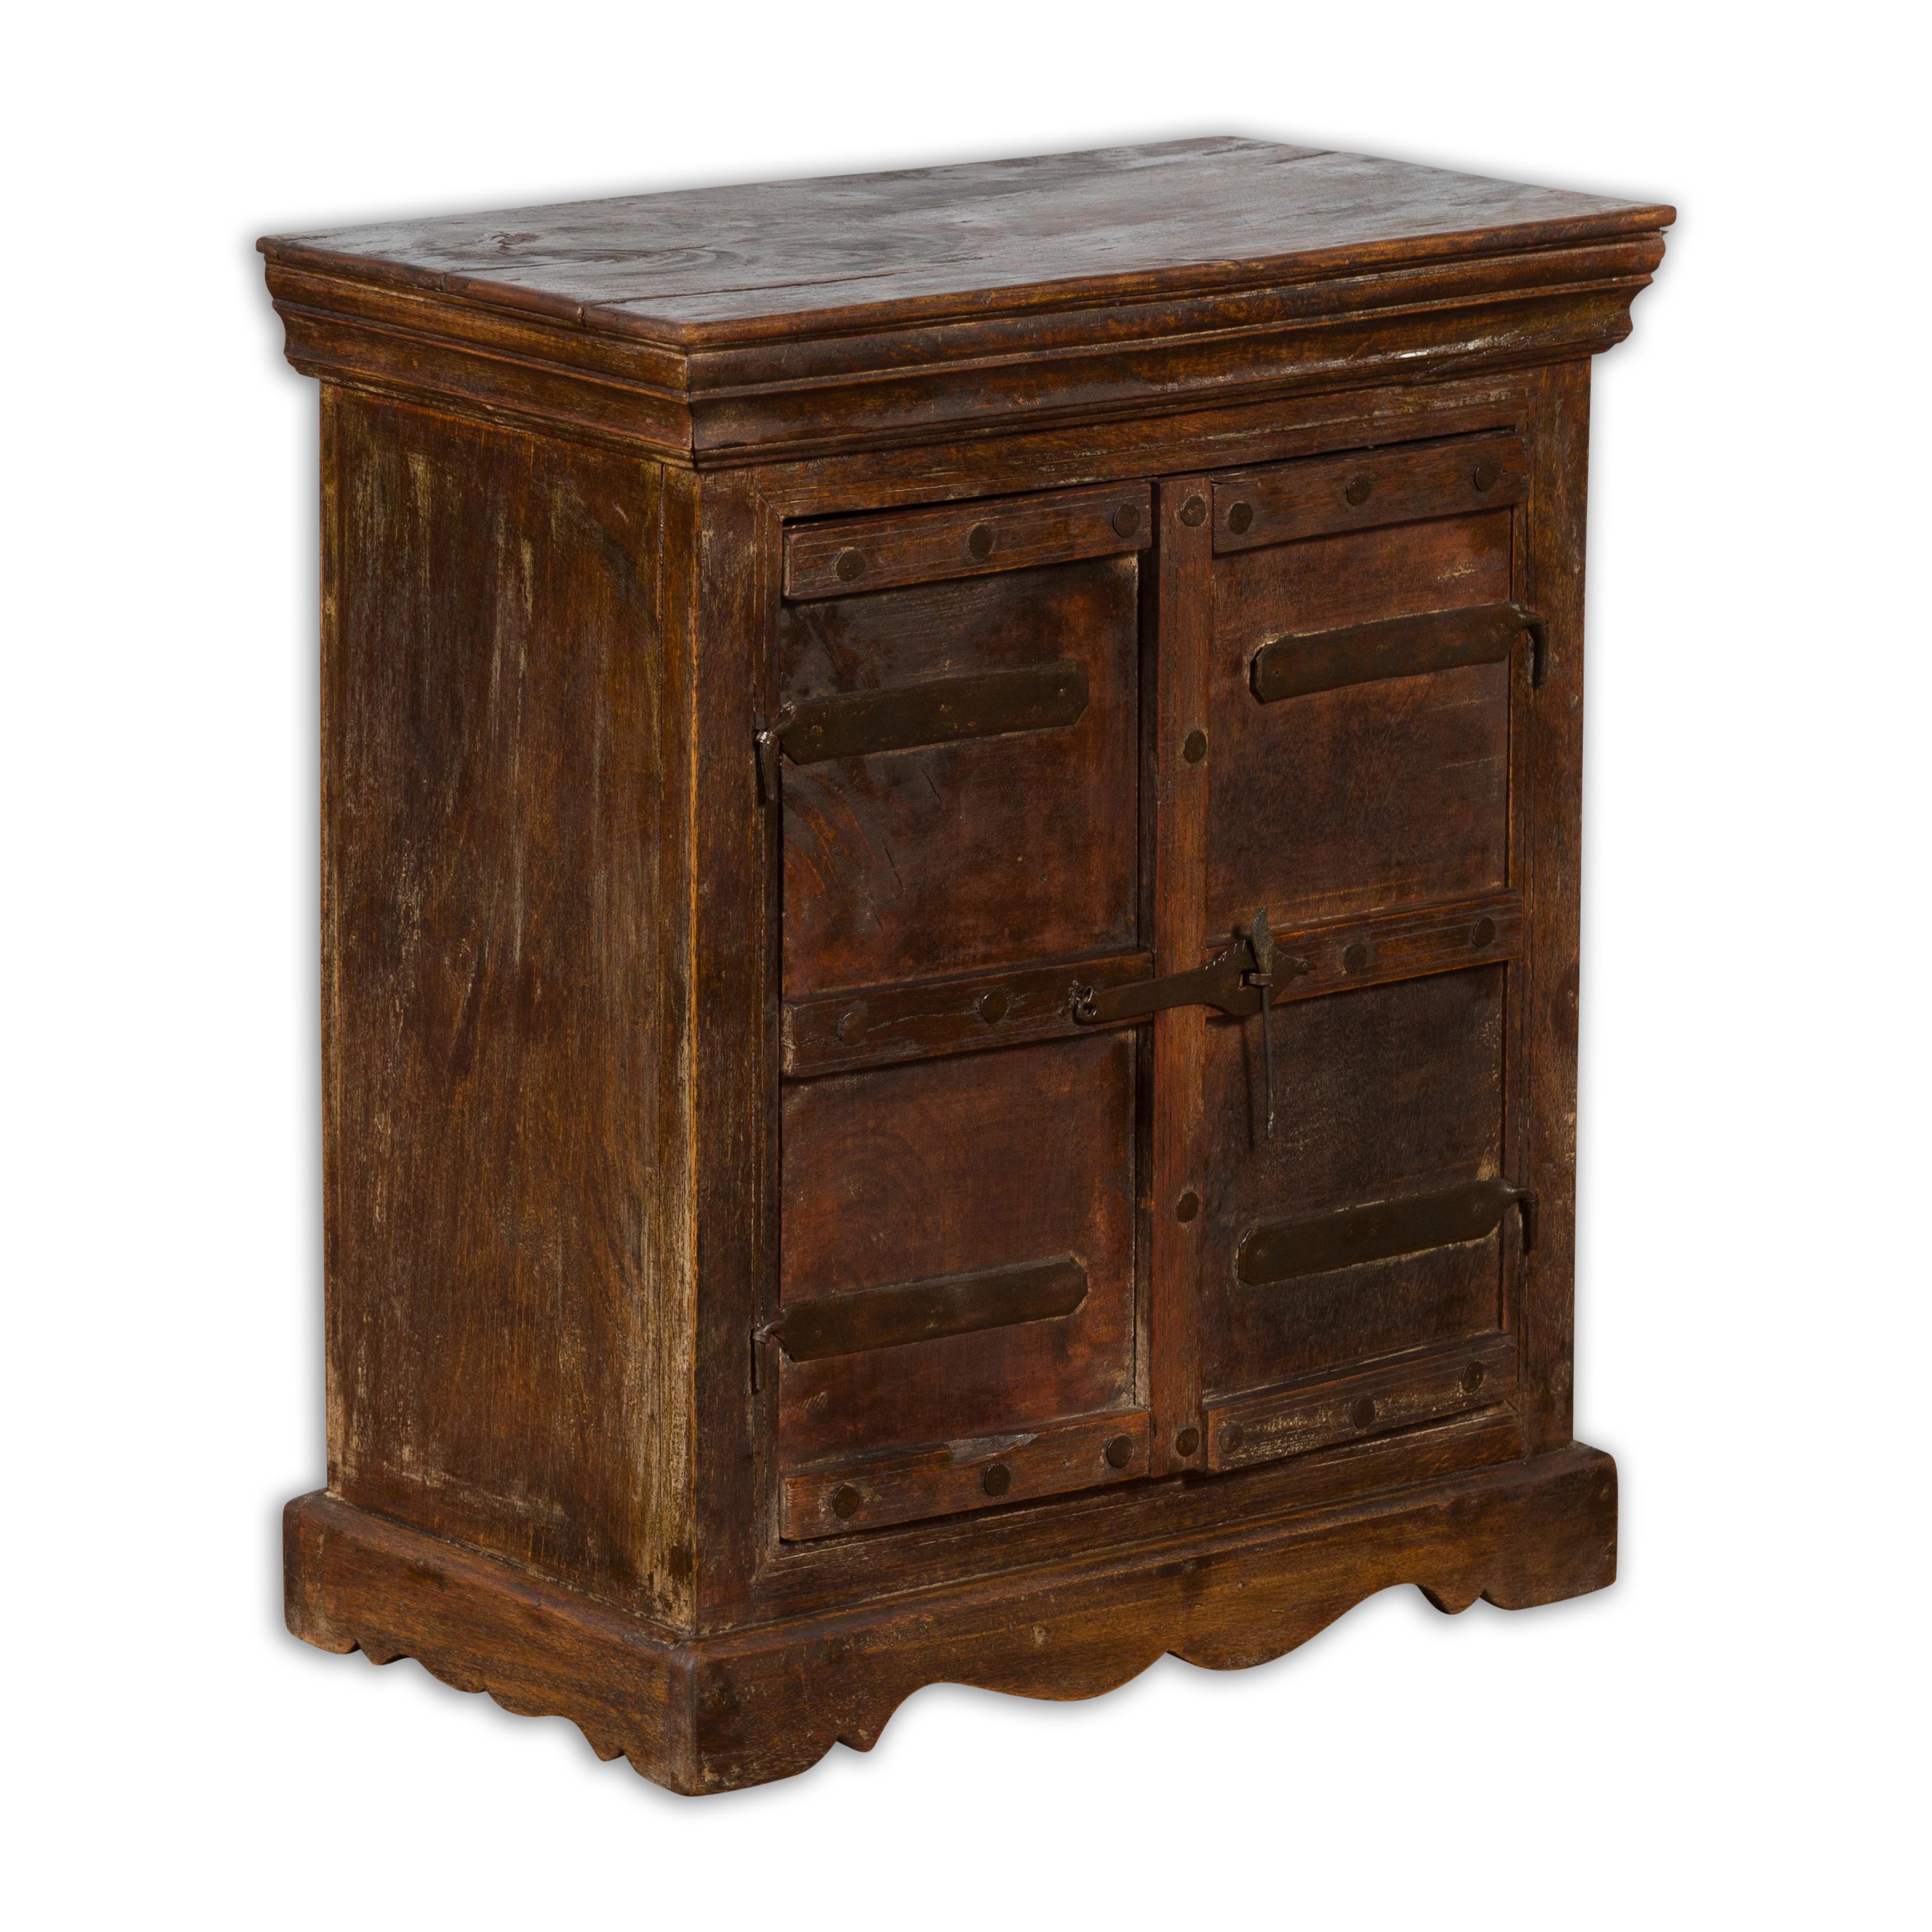 Rustic Indian Vintage Sheesham Small Cabinet with Iron Hardware Dark Patina 12